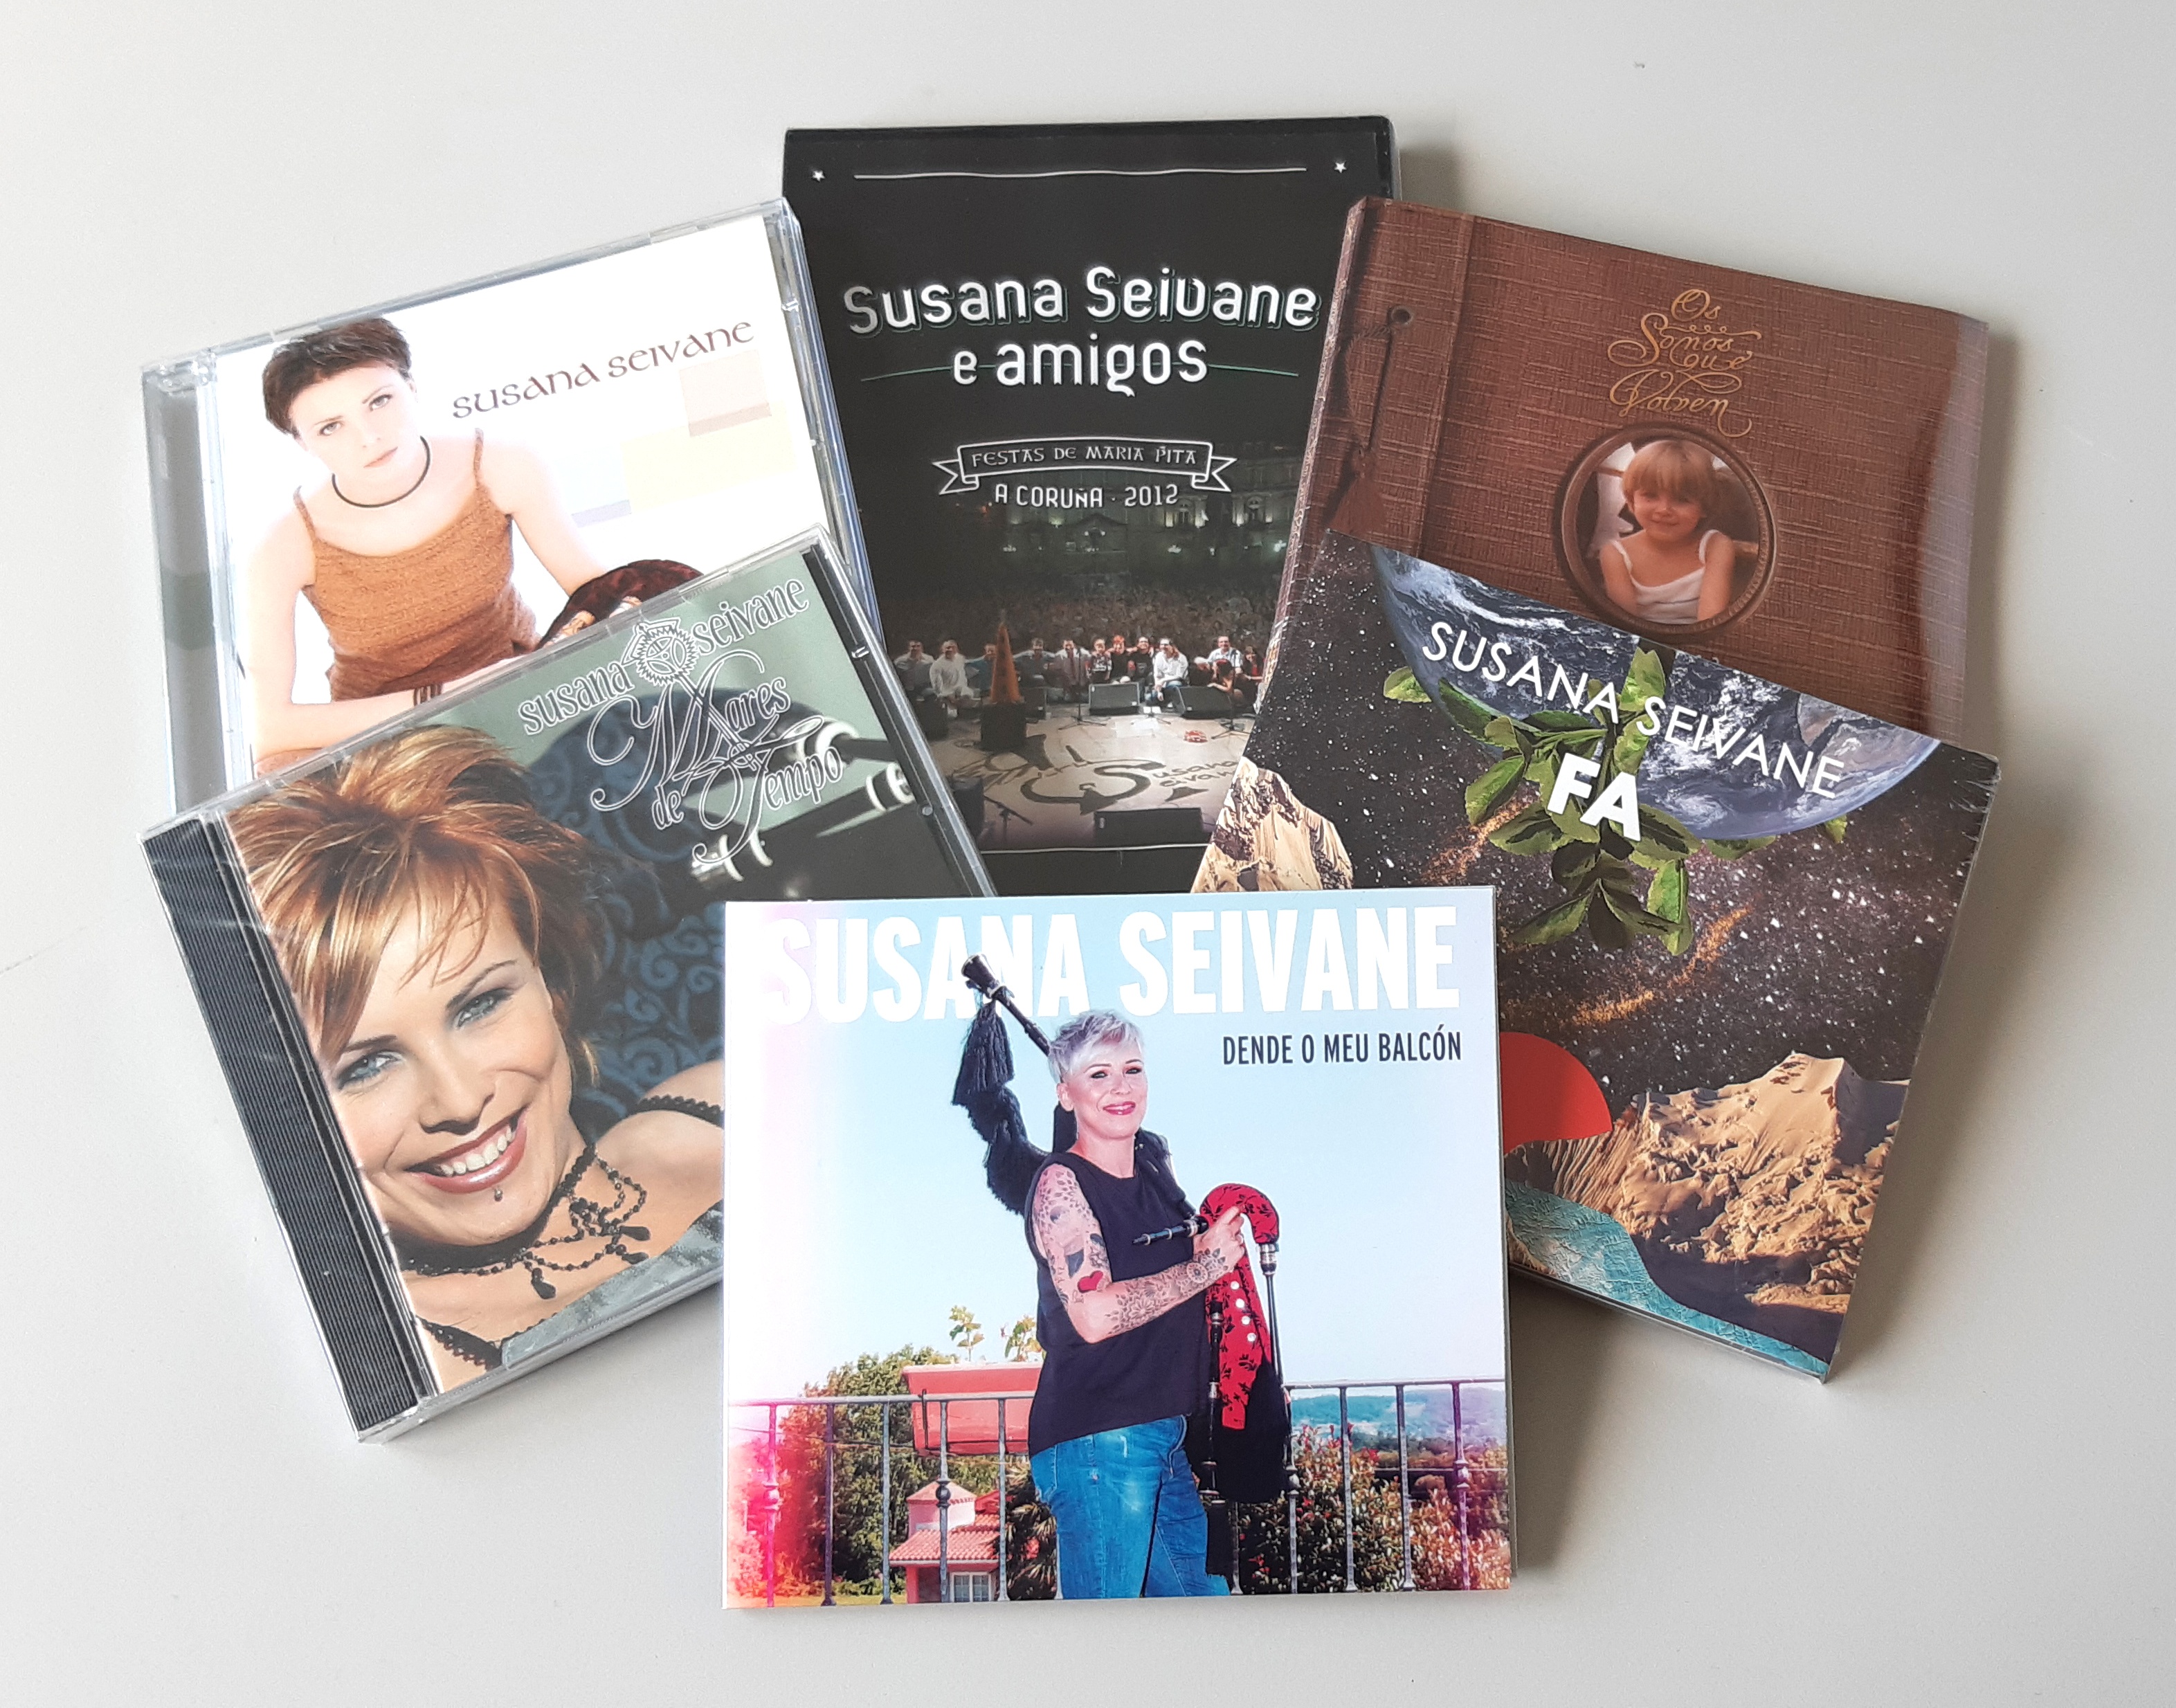 PACK OF ALBUMS (-25% DISCOUNT)